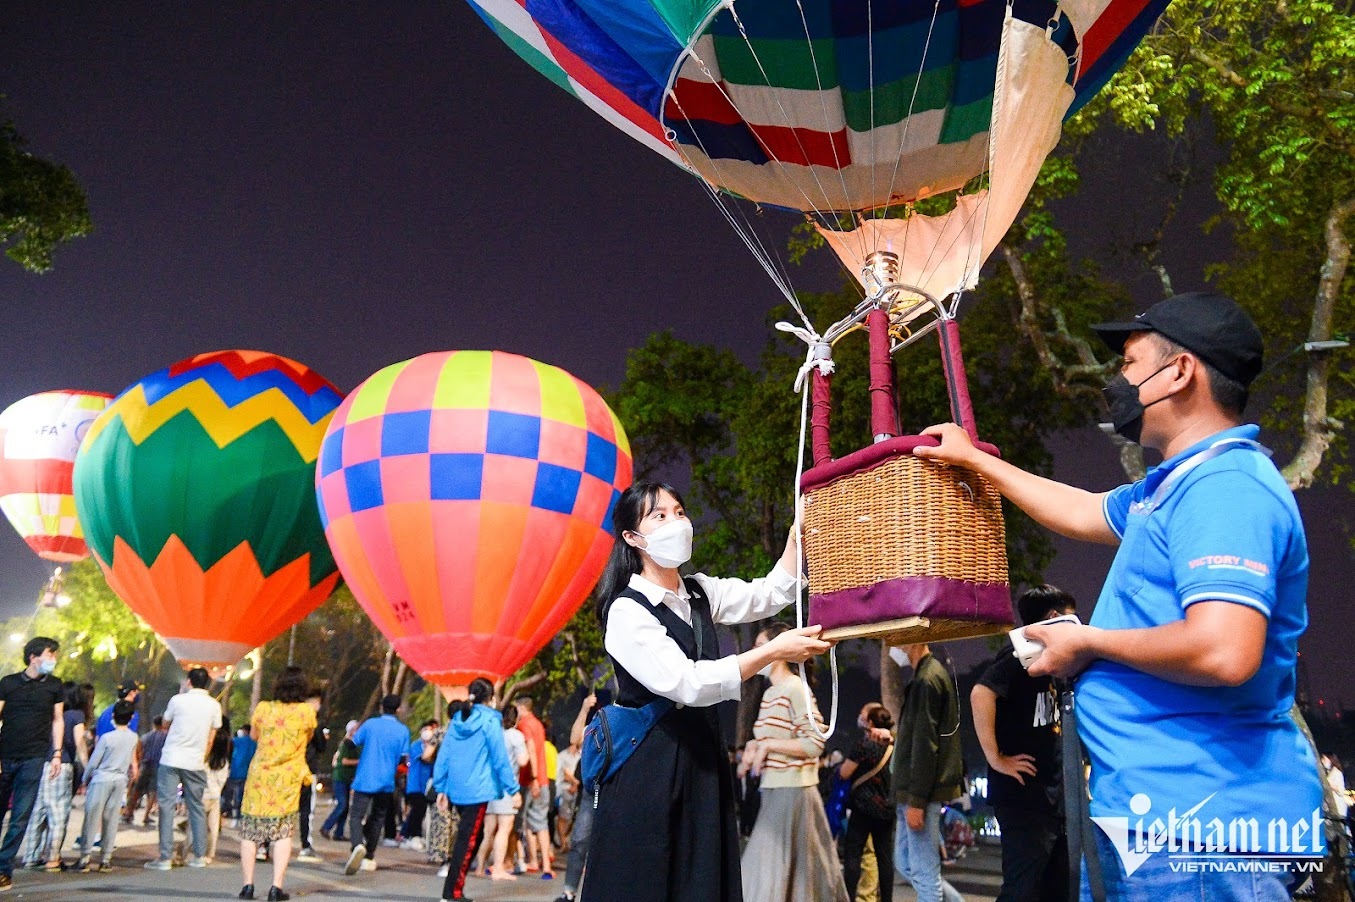 Thousands of people flock to Hoan Kiem Lake walking street to watch the giant hot air balloon